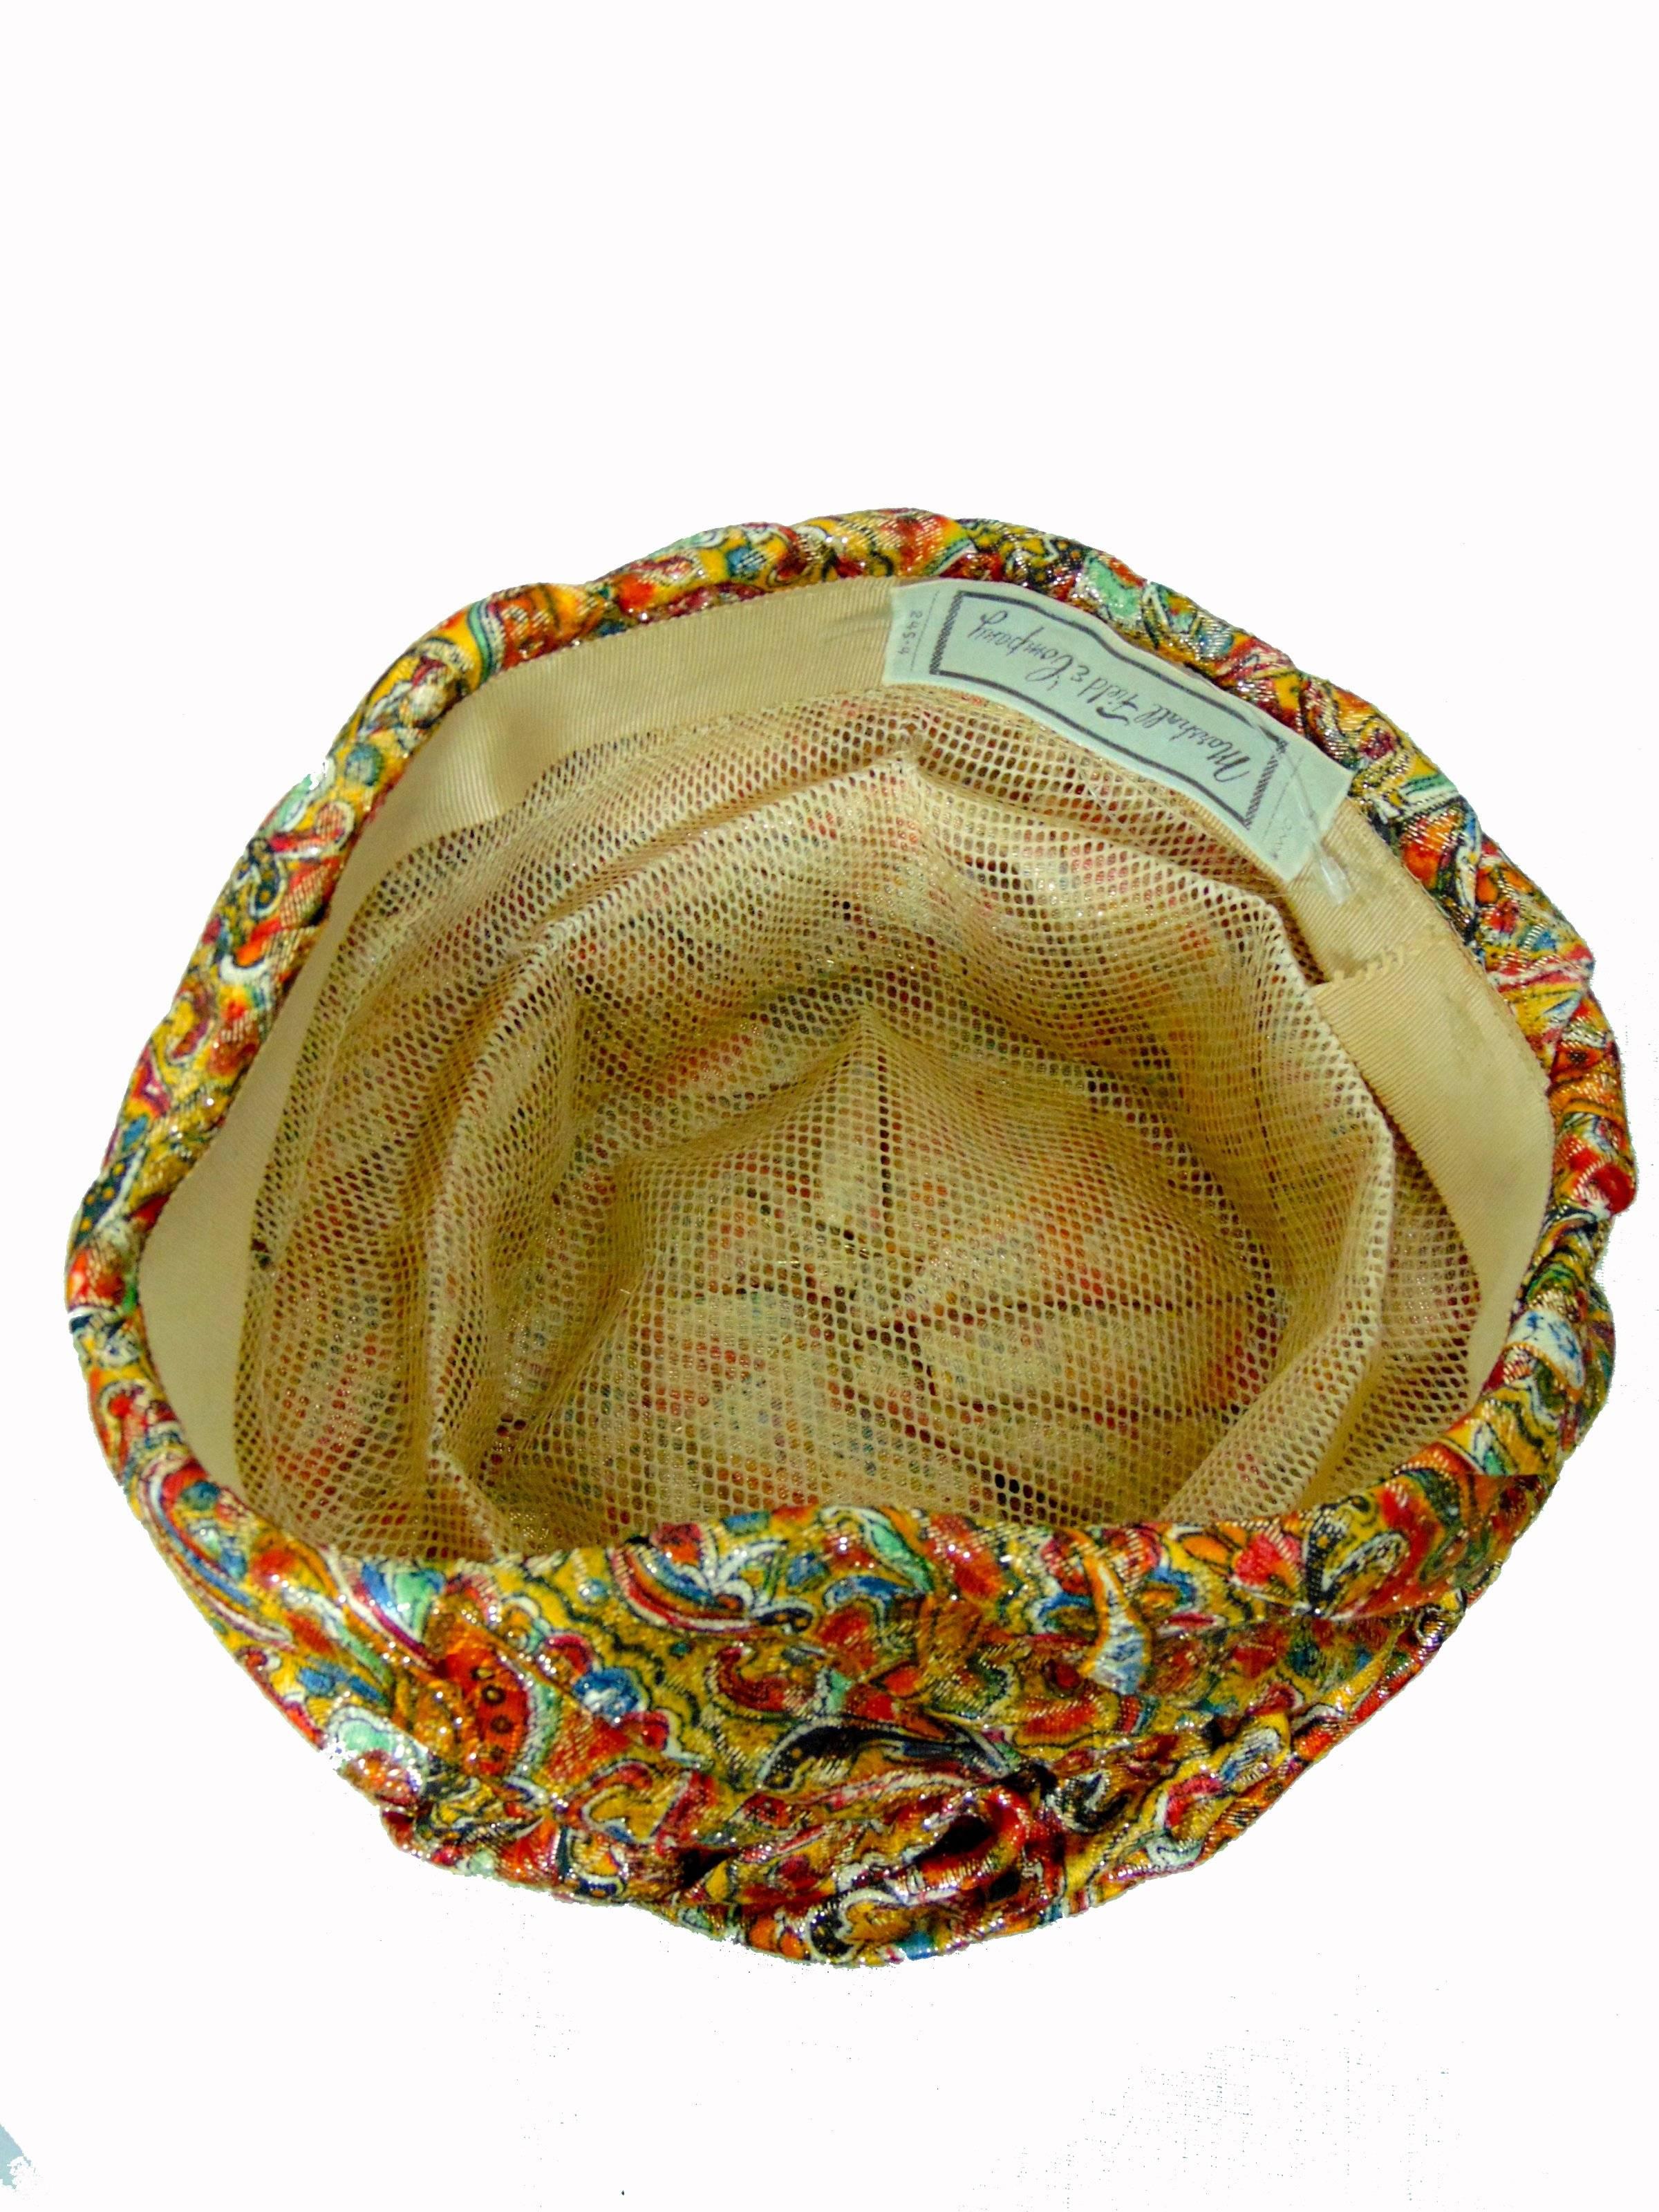 1950s Colorful Metallic Paisley Turban Hat by Marshall Field & Company Size S  3